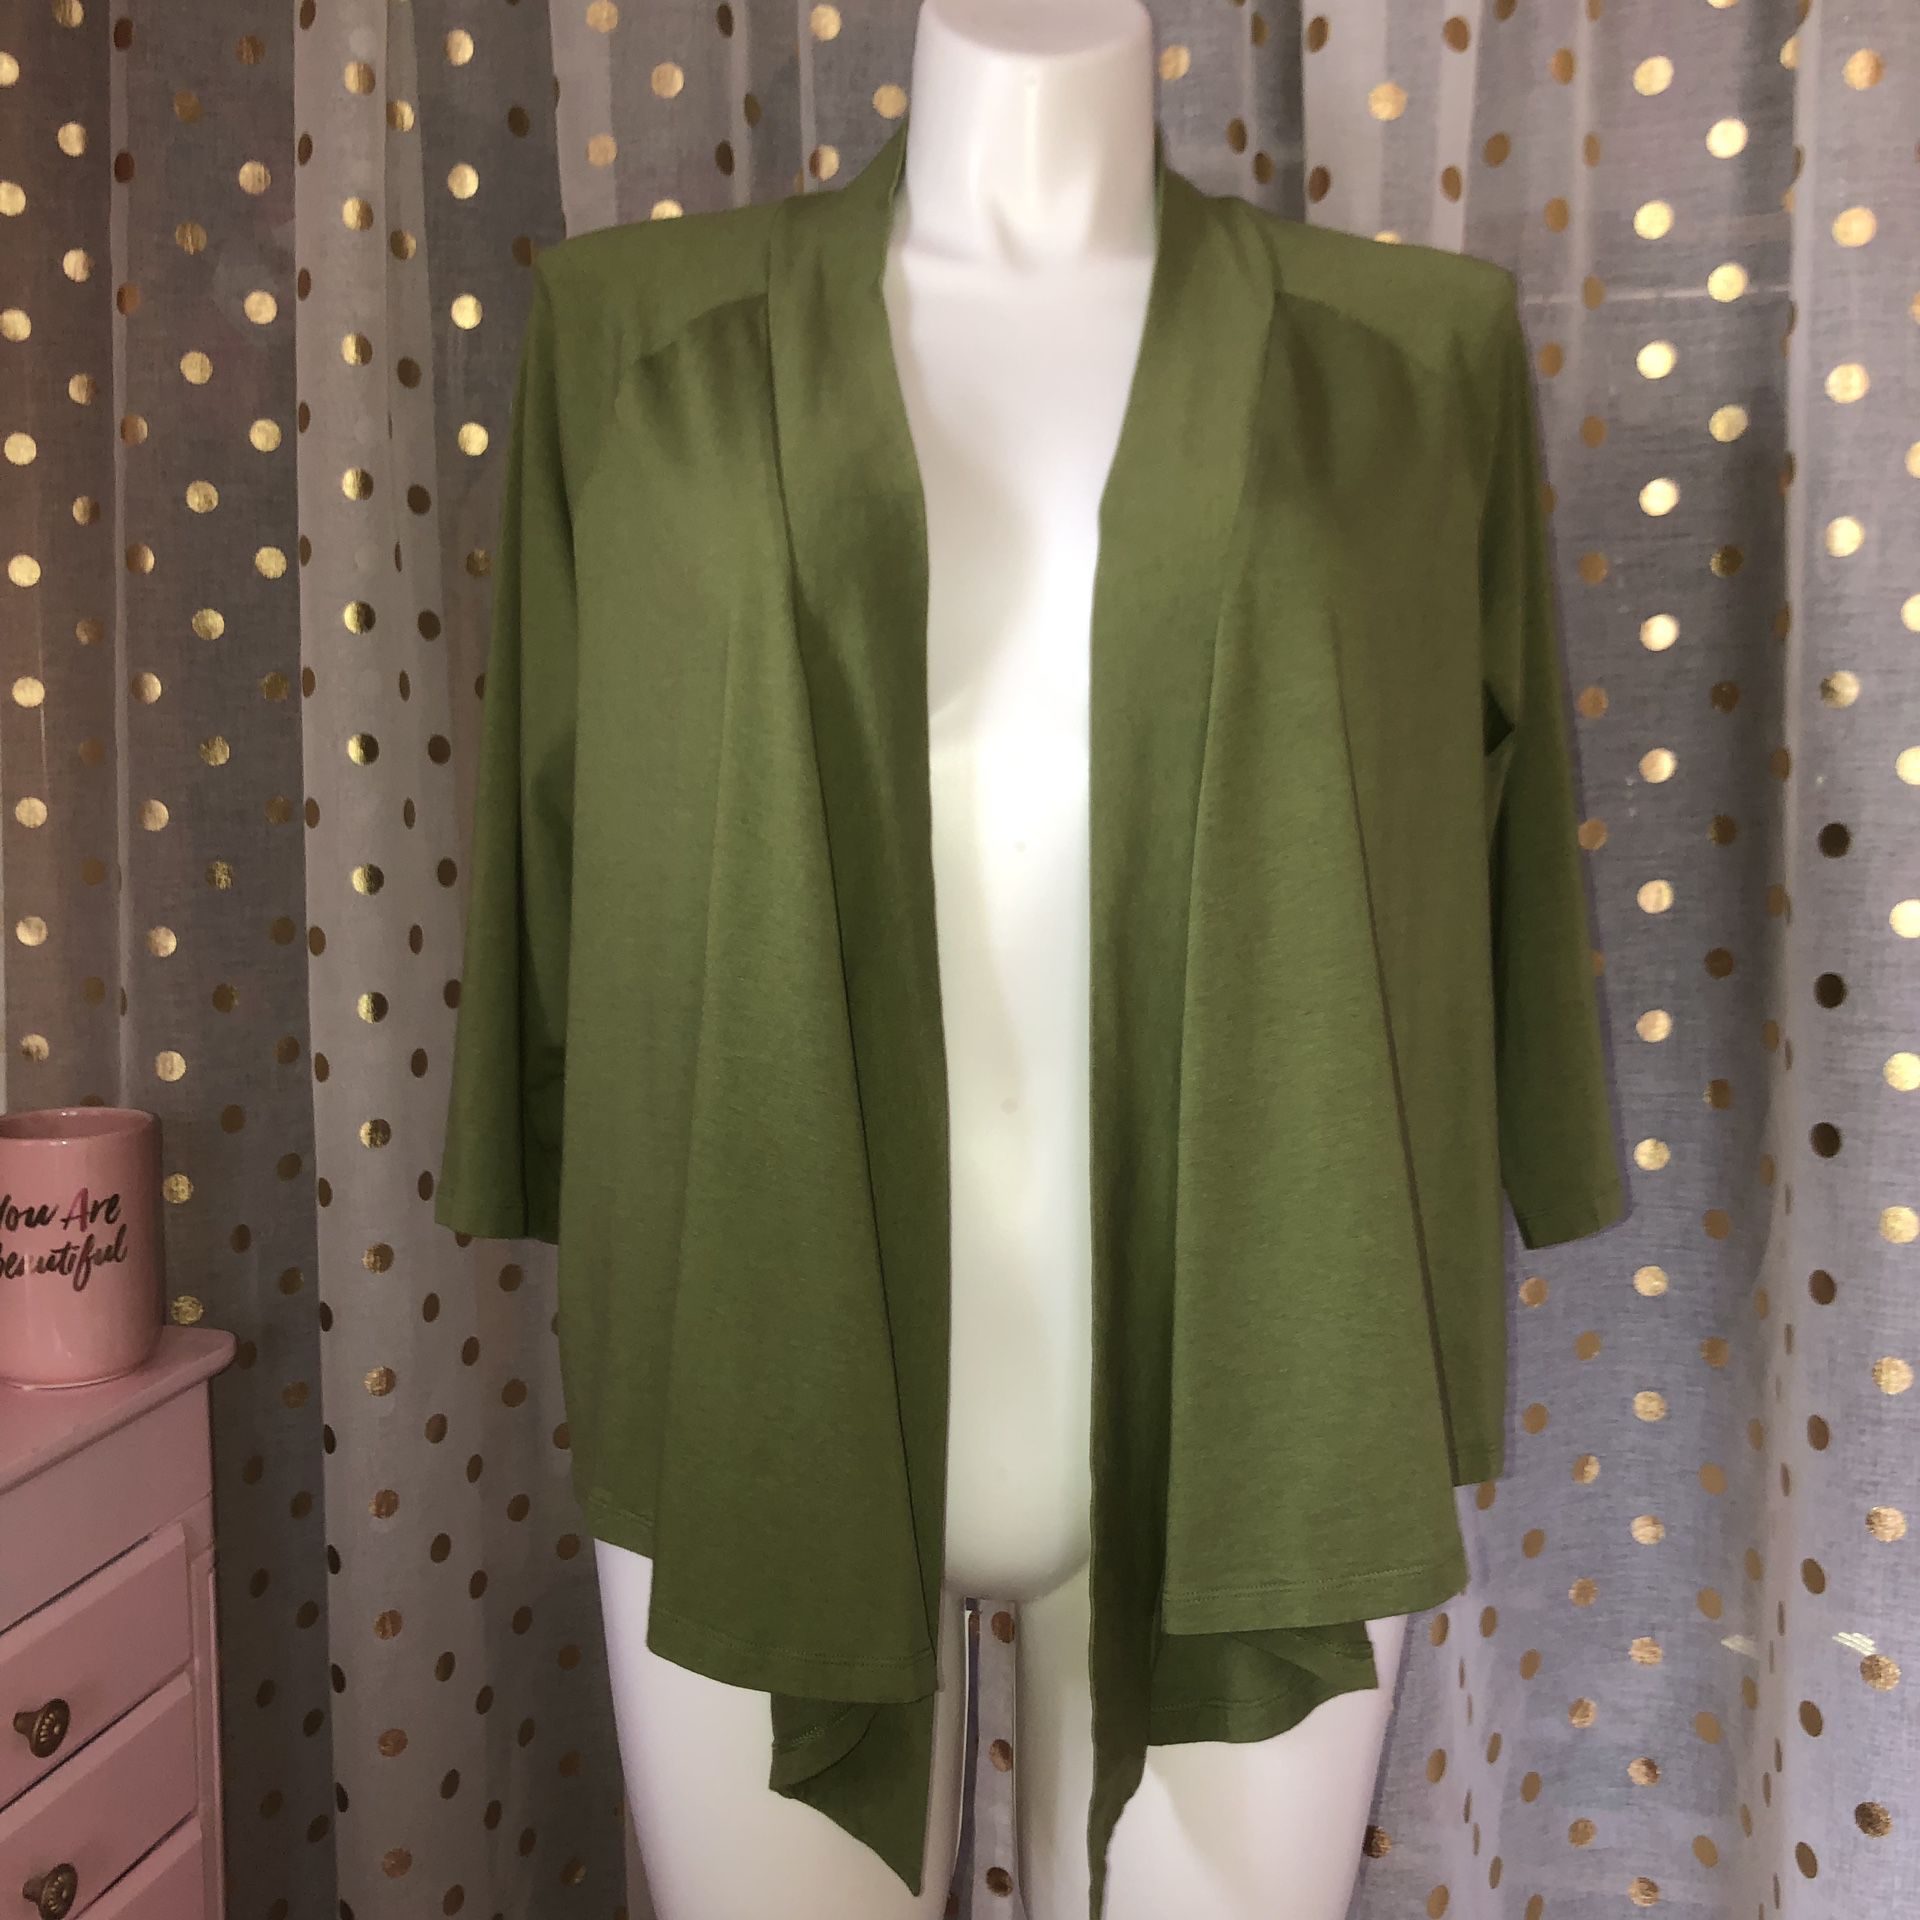 Charter Club size 2x open front olive green 3/4 length sleeve top